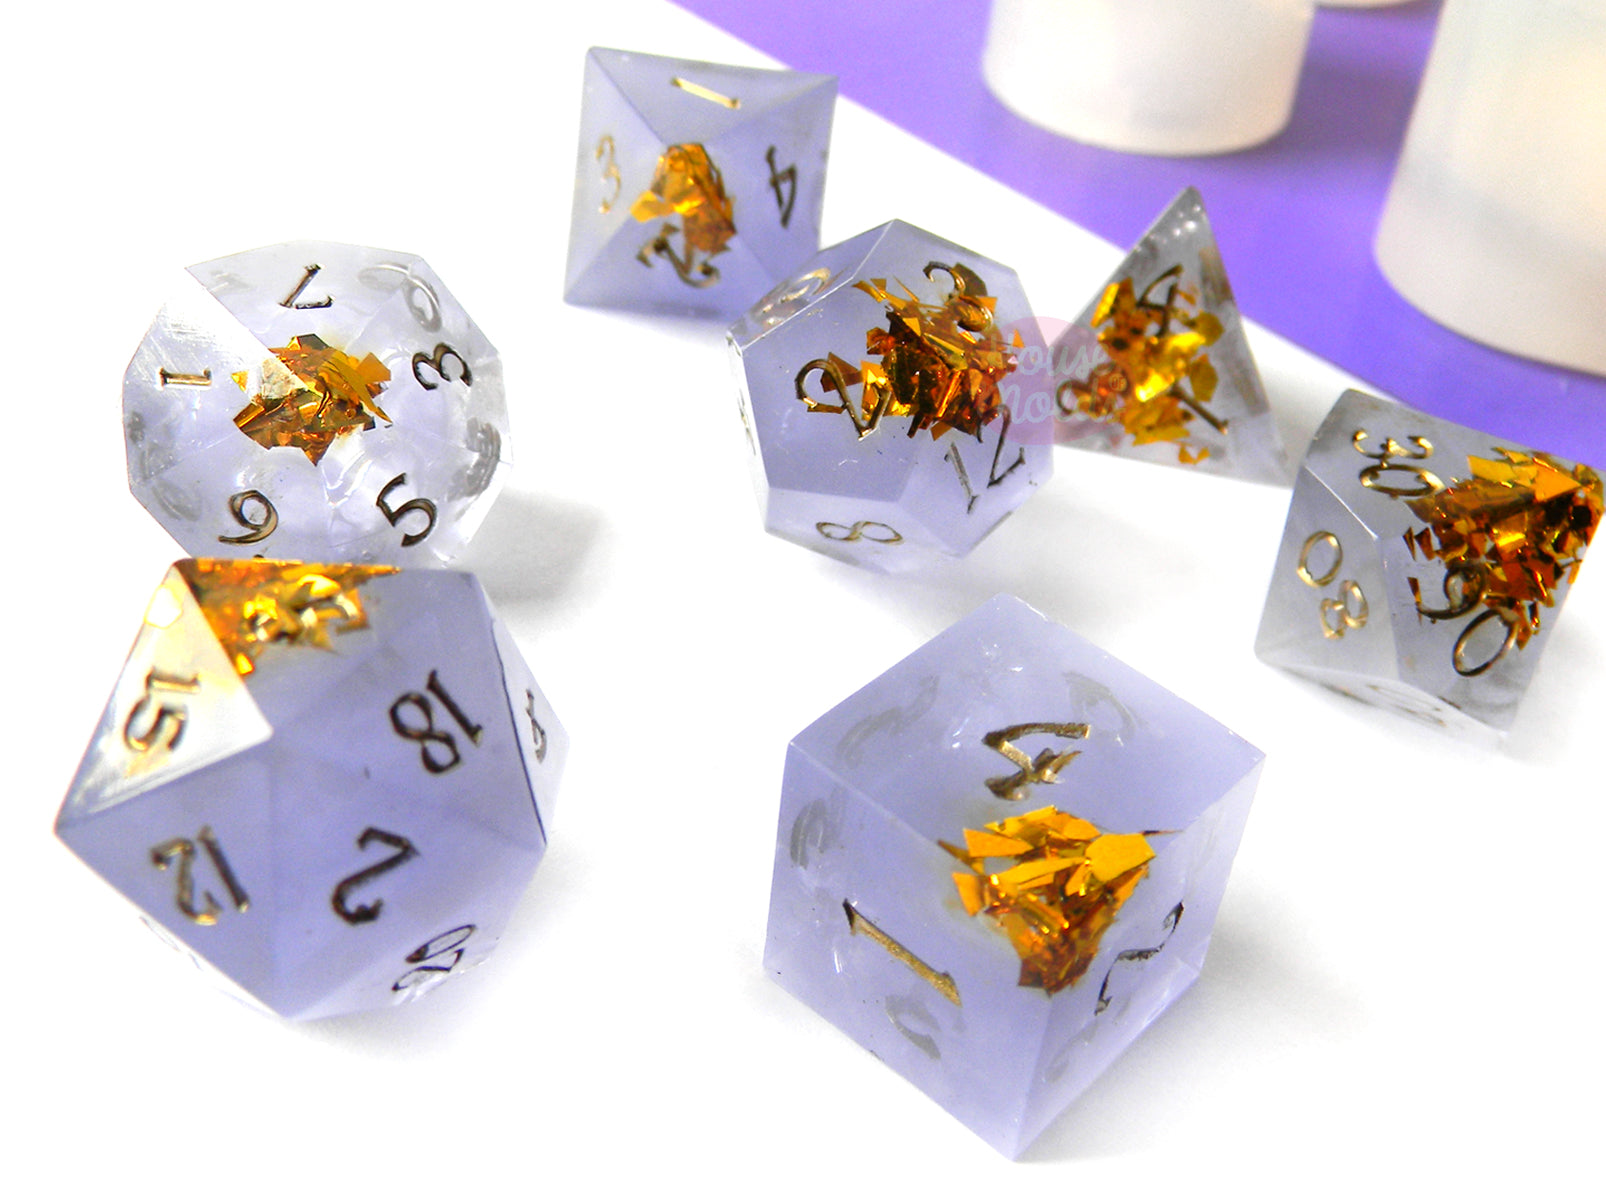 7 Shapes Dice Molds for Resin, EEEkit Resin Dice Mold Set with